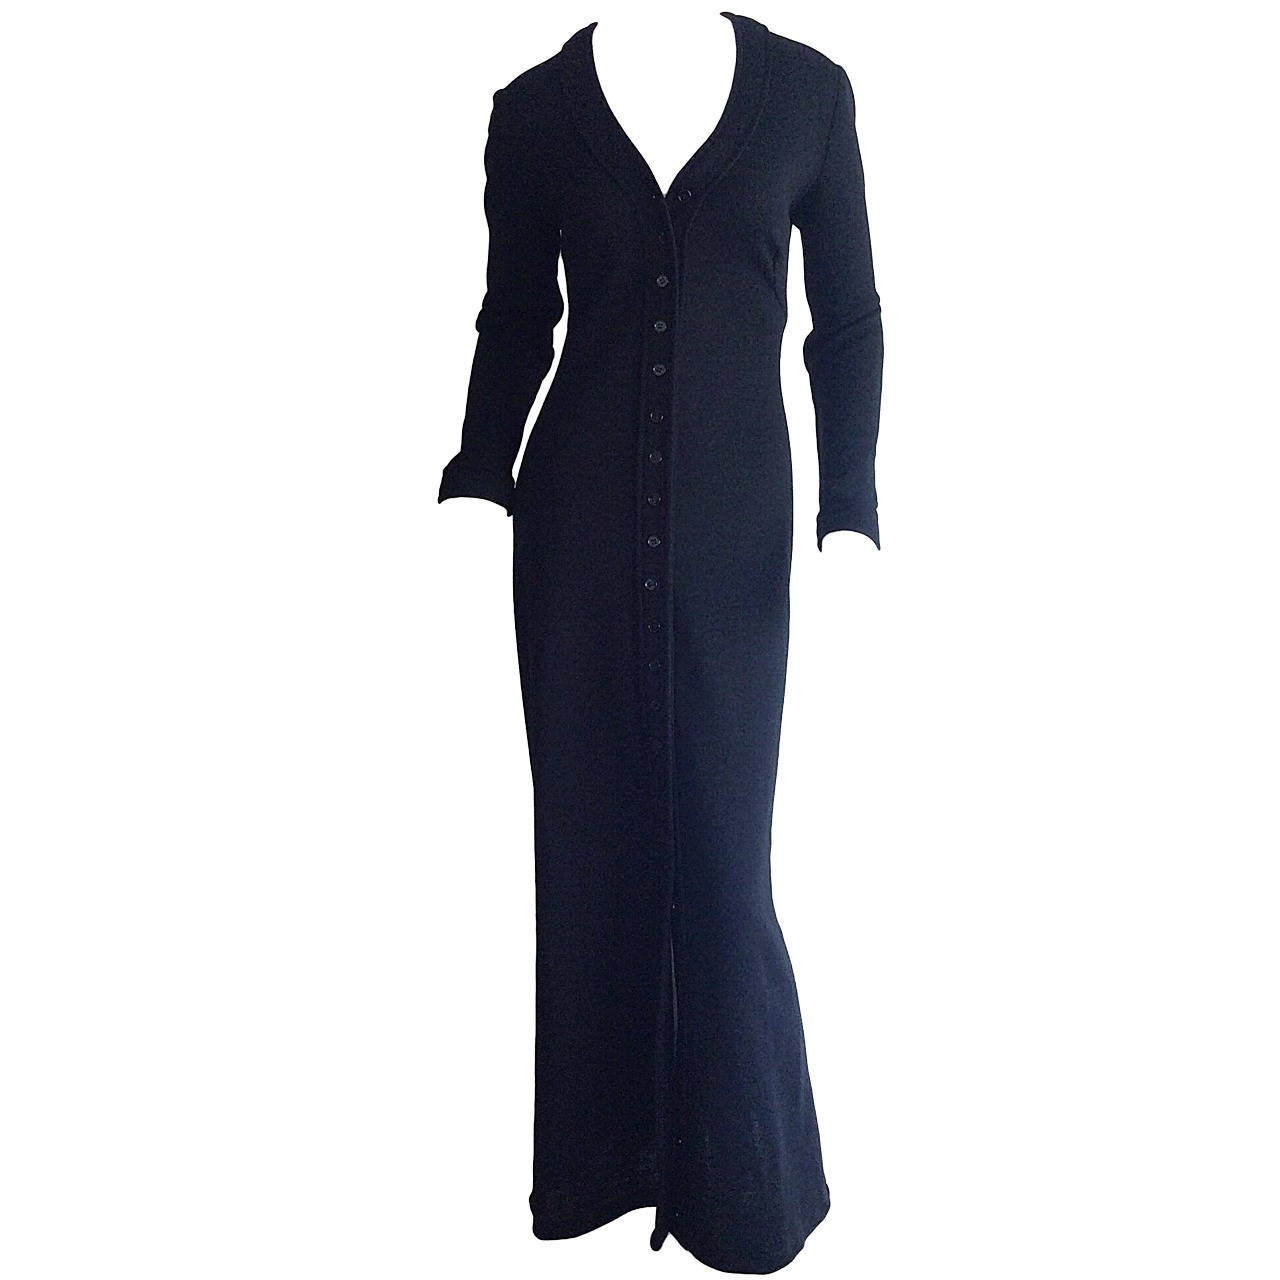 Incredible Vintage Mary Quant for Bonwit Teller Black Wool Shirt Dress